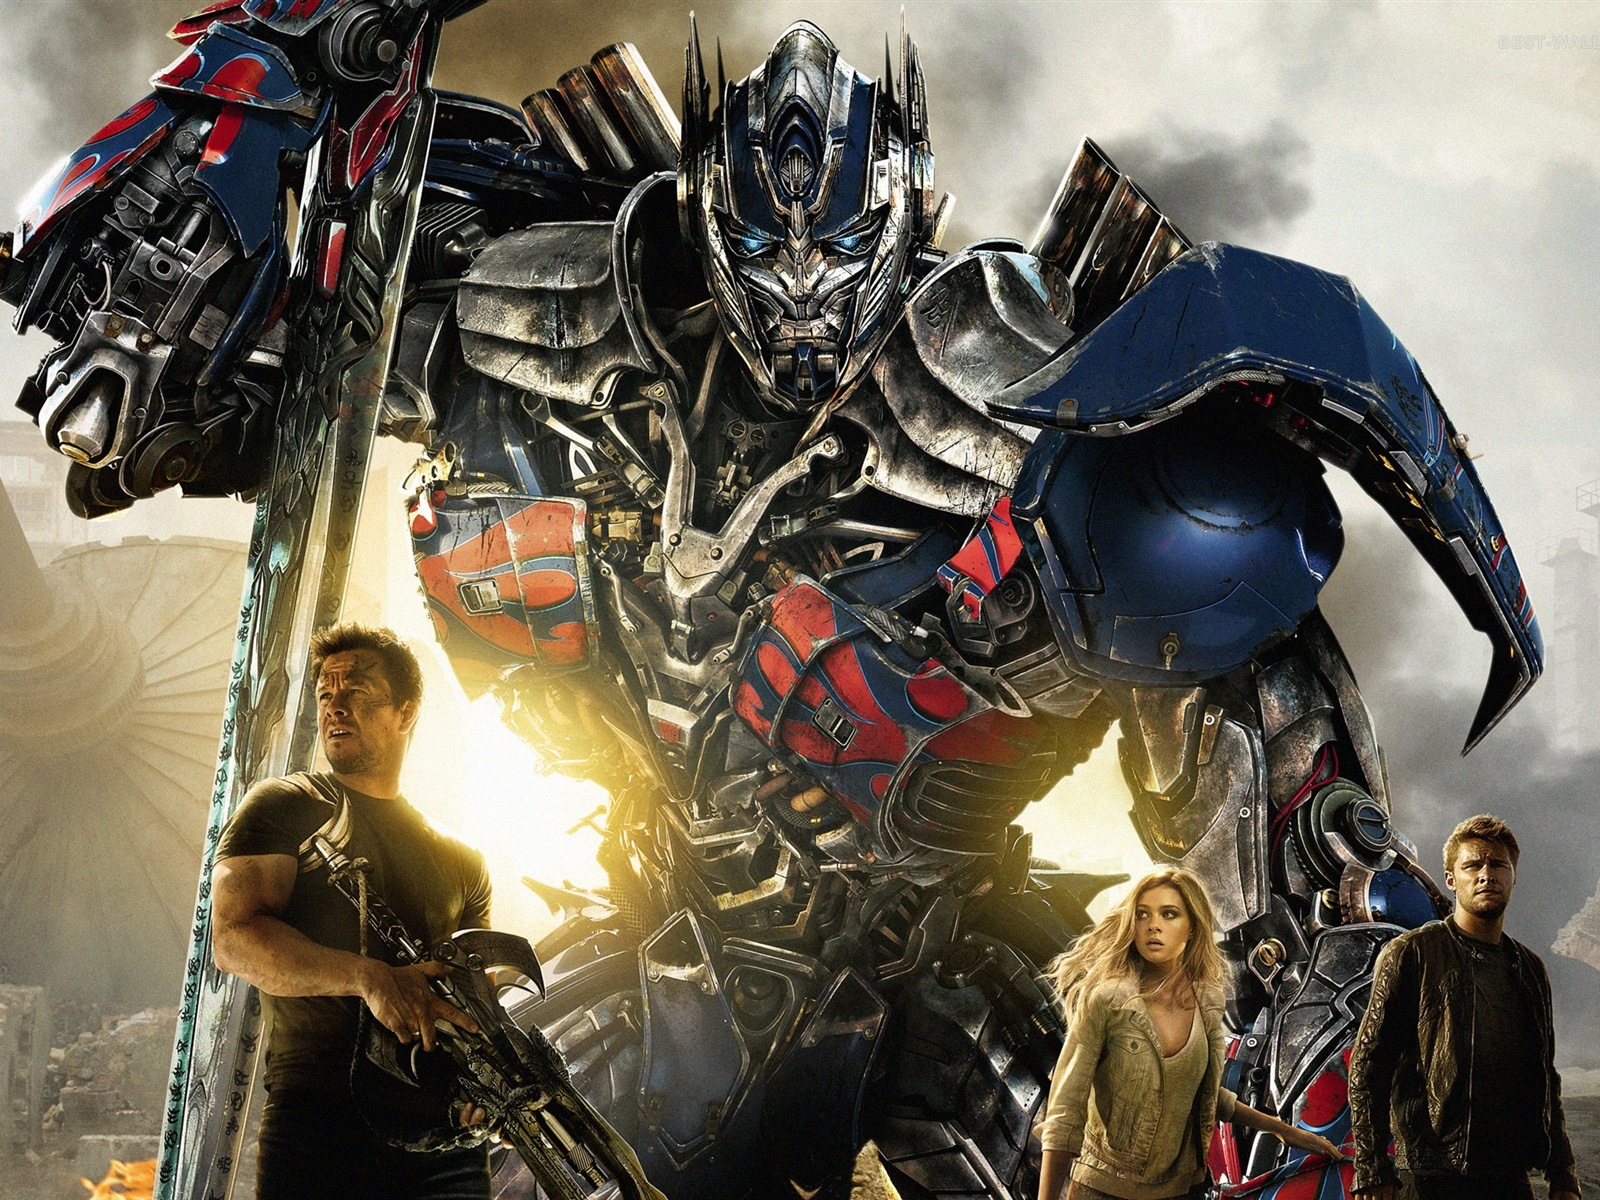 2014 Transformers: Age of Extinction HD tapety #1 - 1600x1200